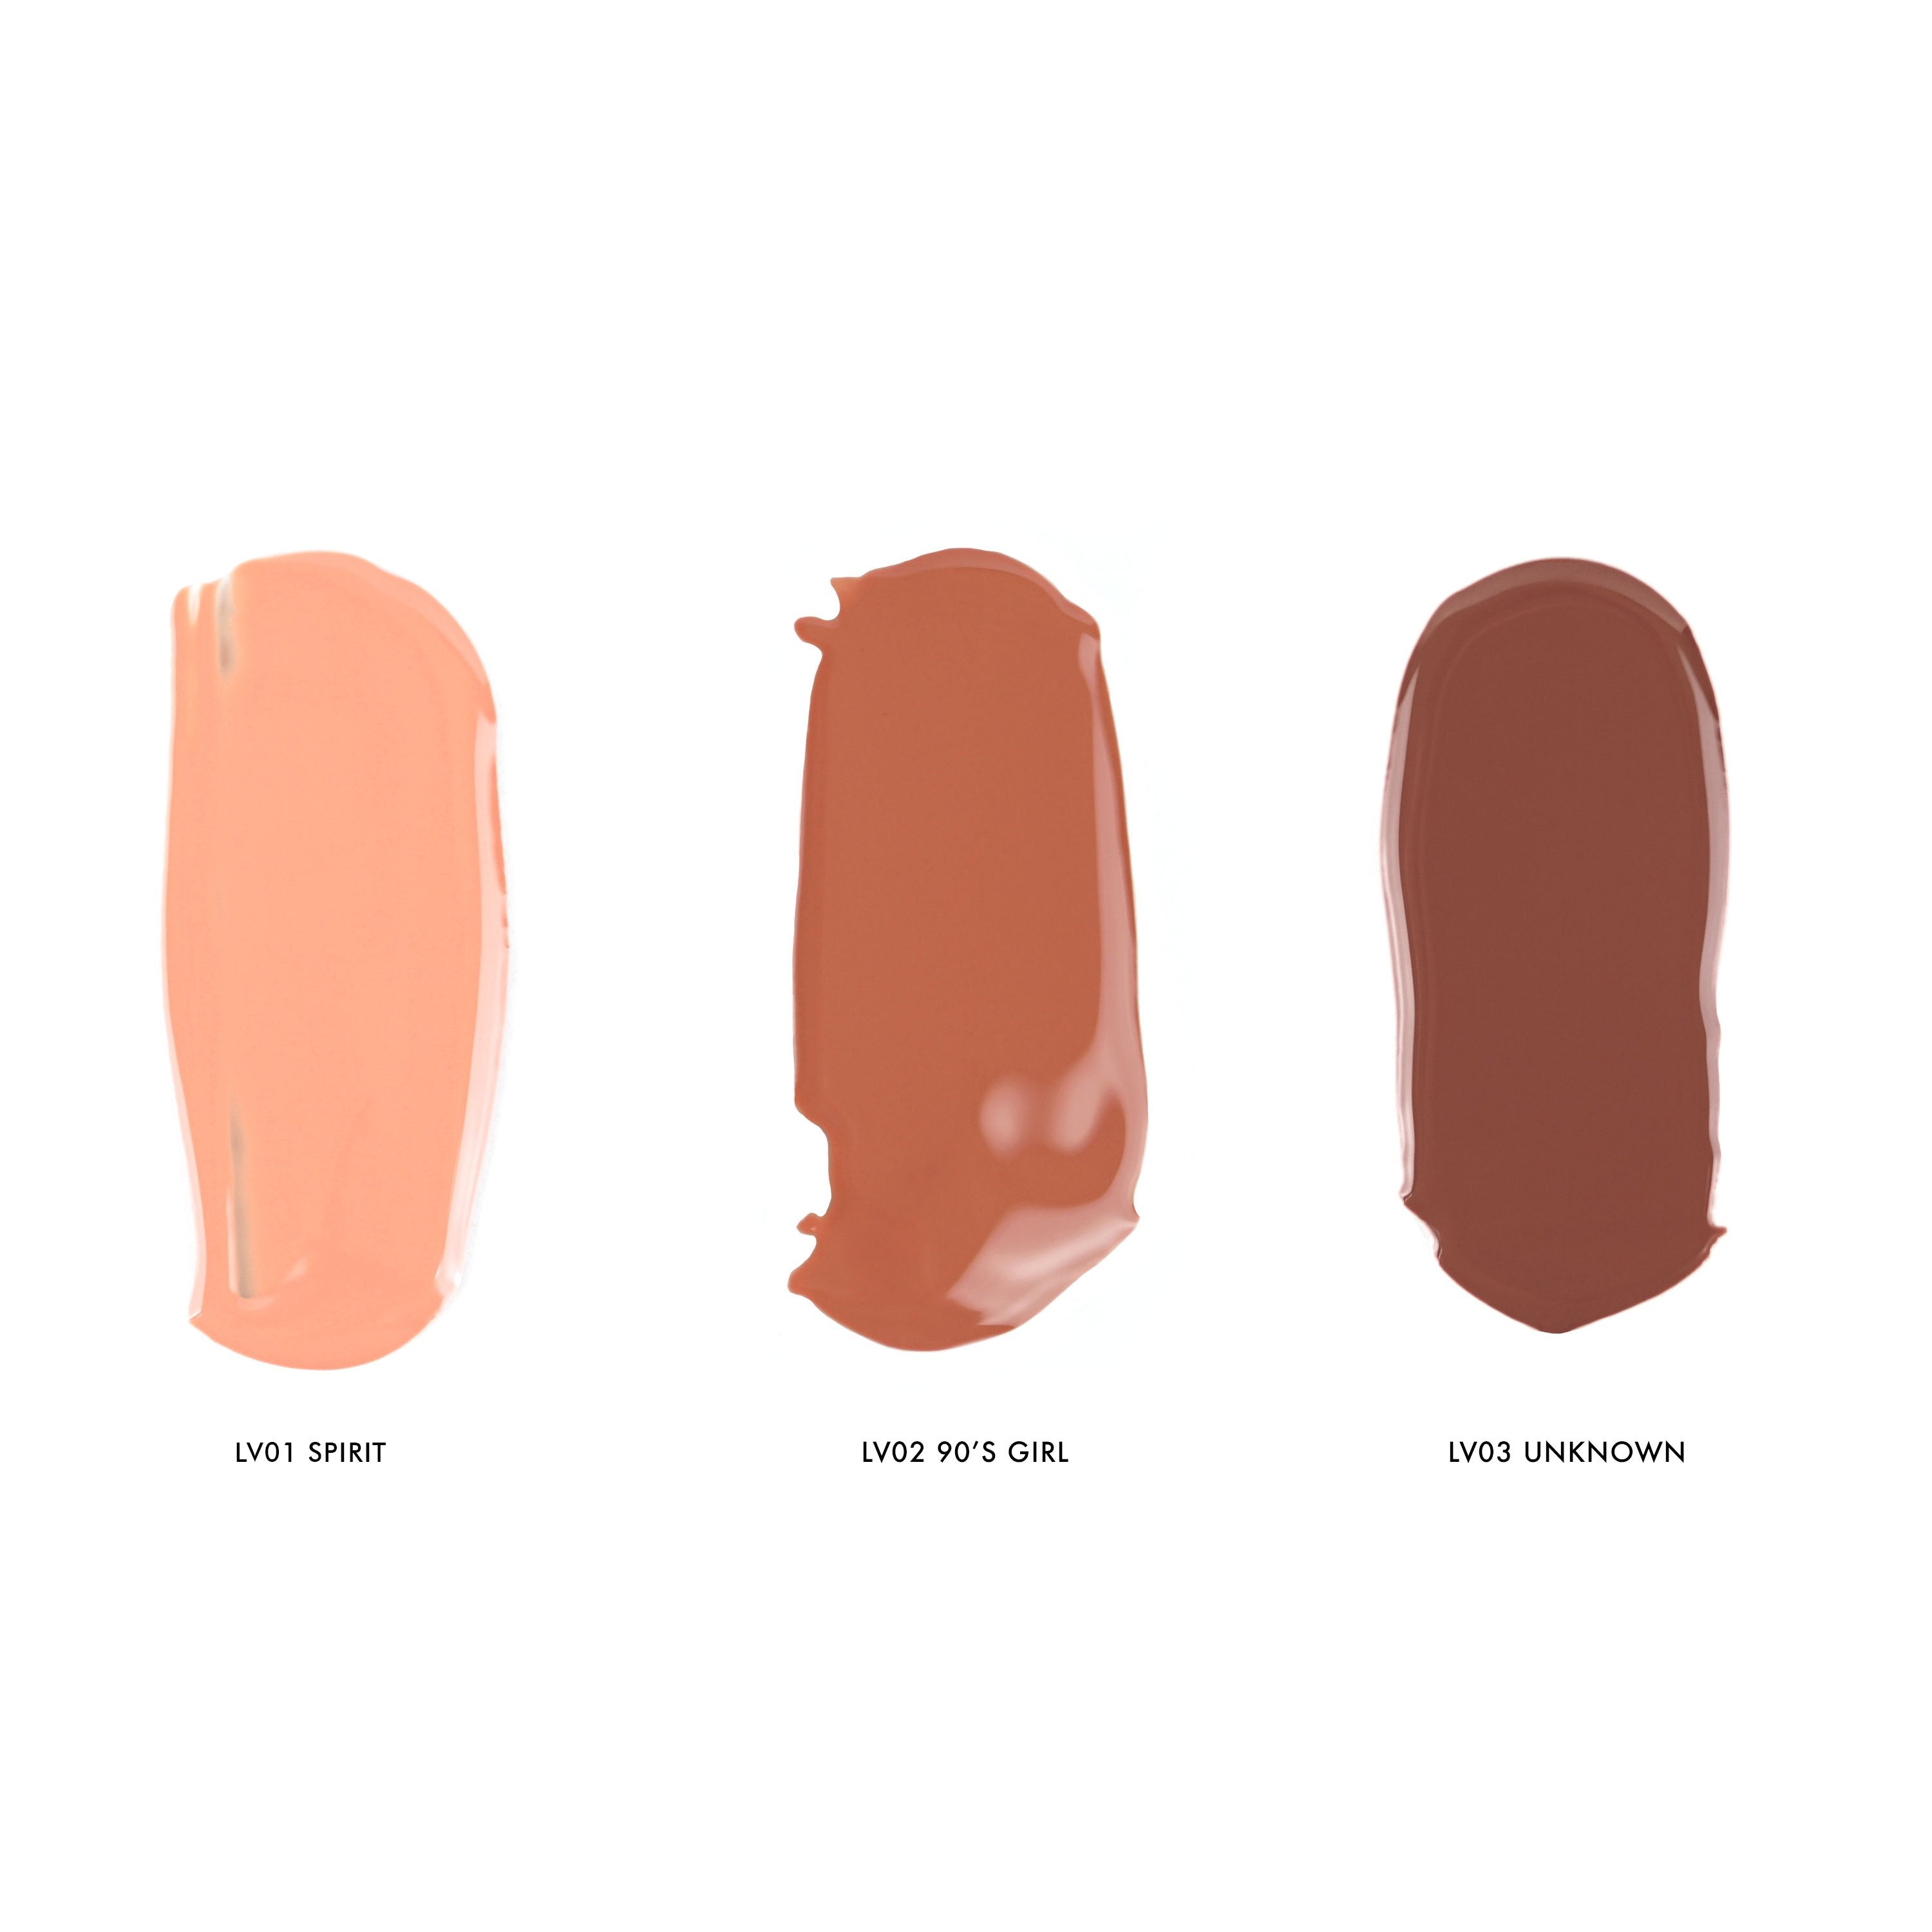 Born to be Natural liquid lipstick swatches